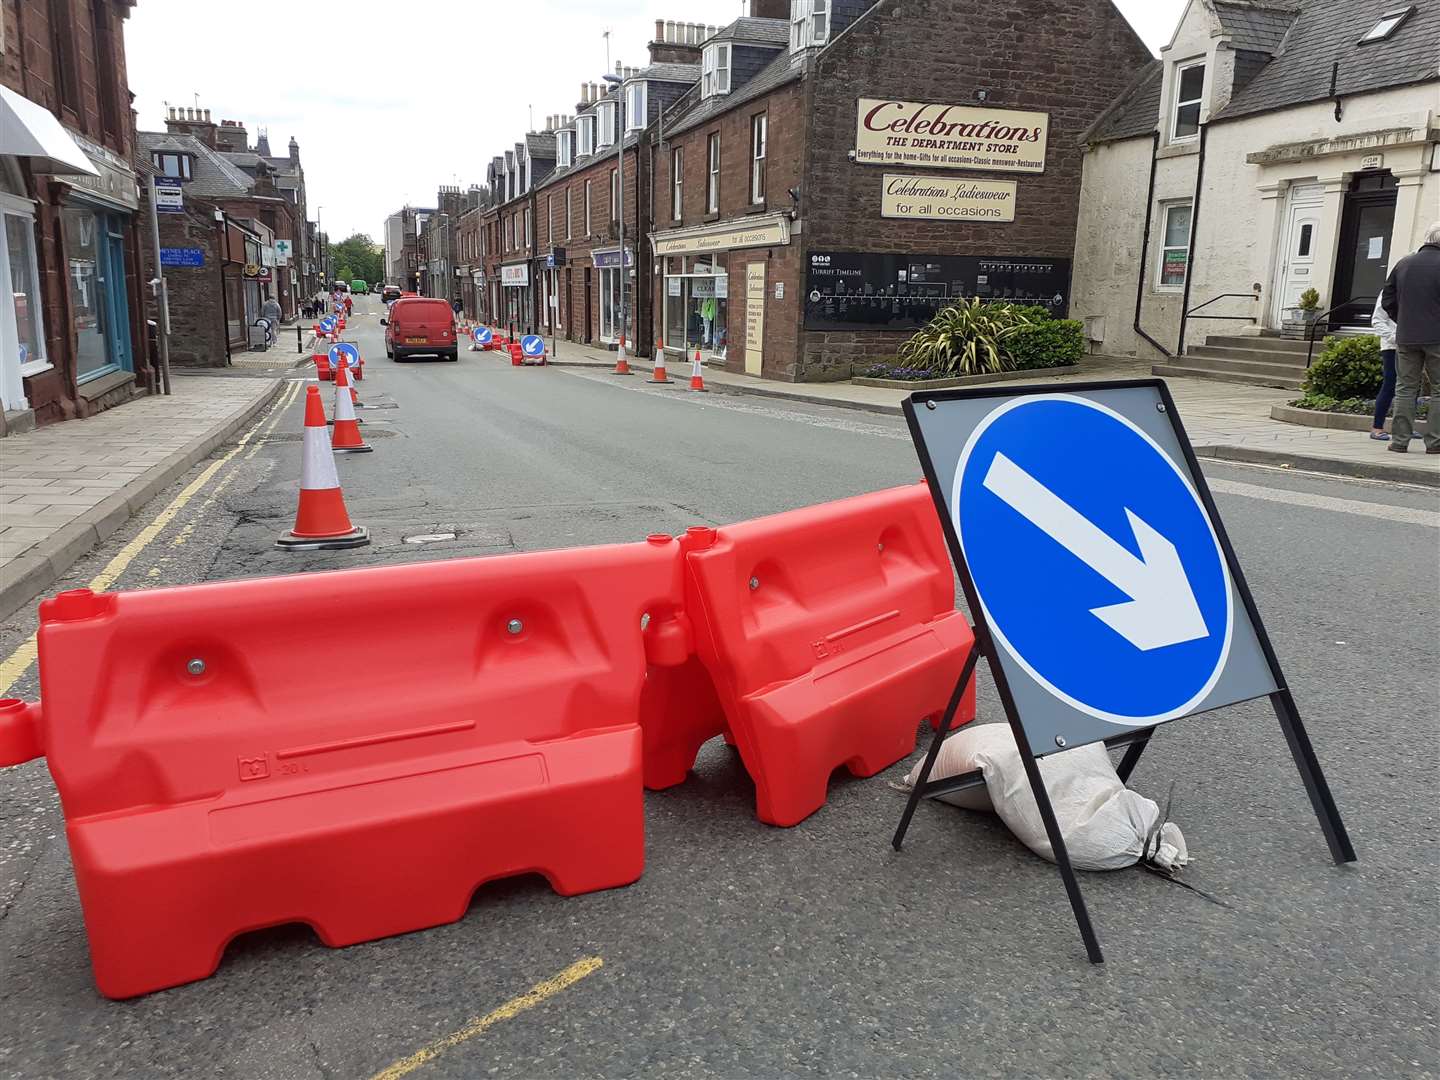 Parking and one way restrictions were introduced on Turriff's Main Street.